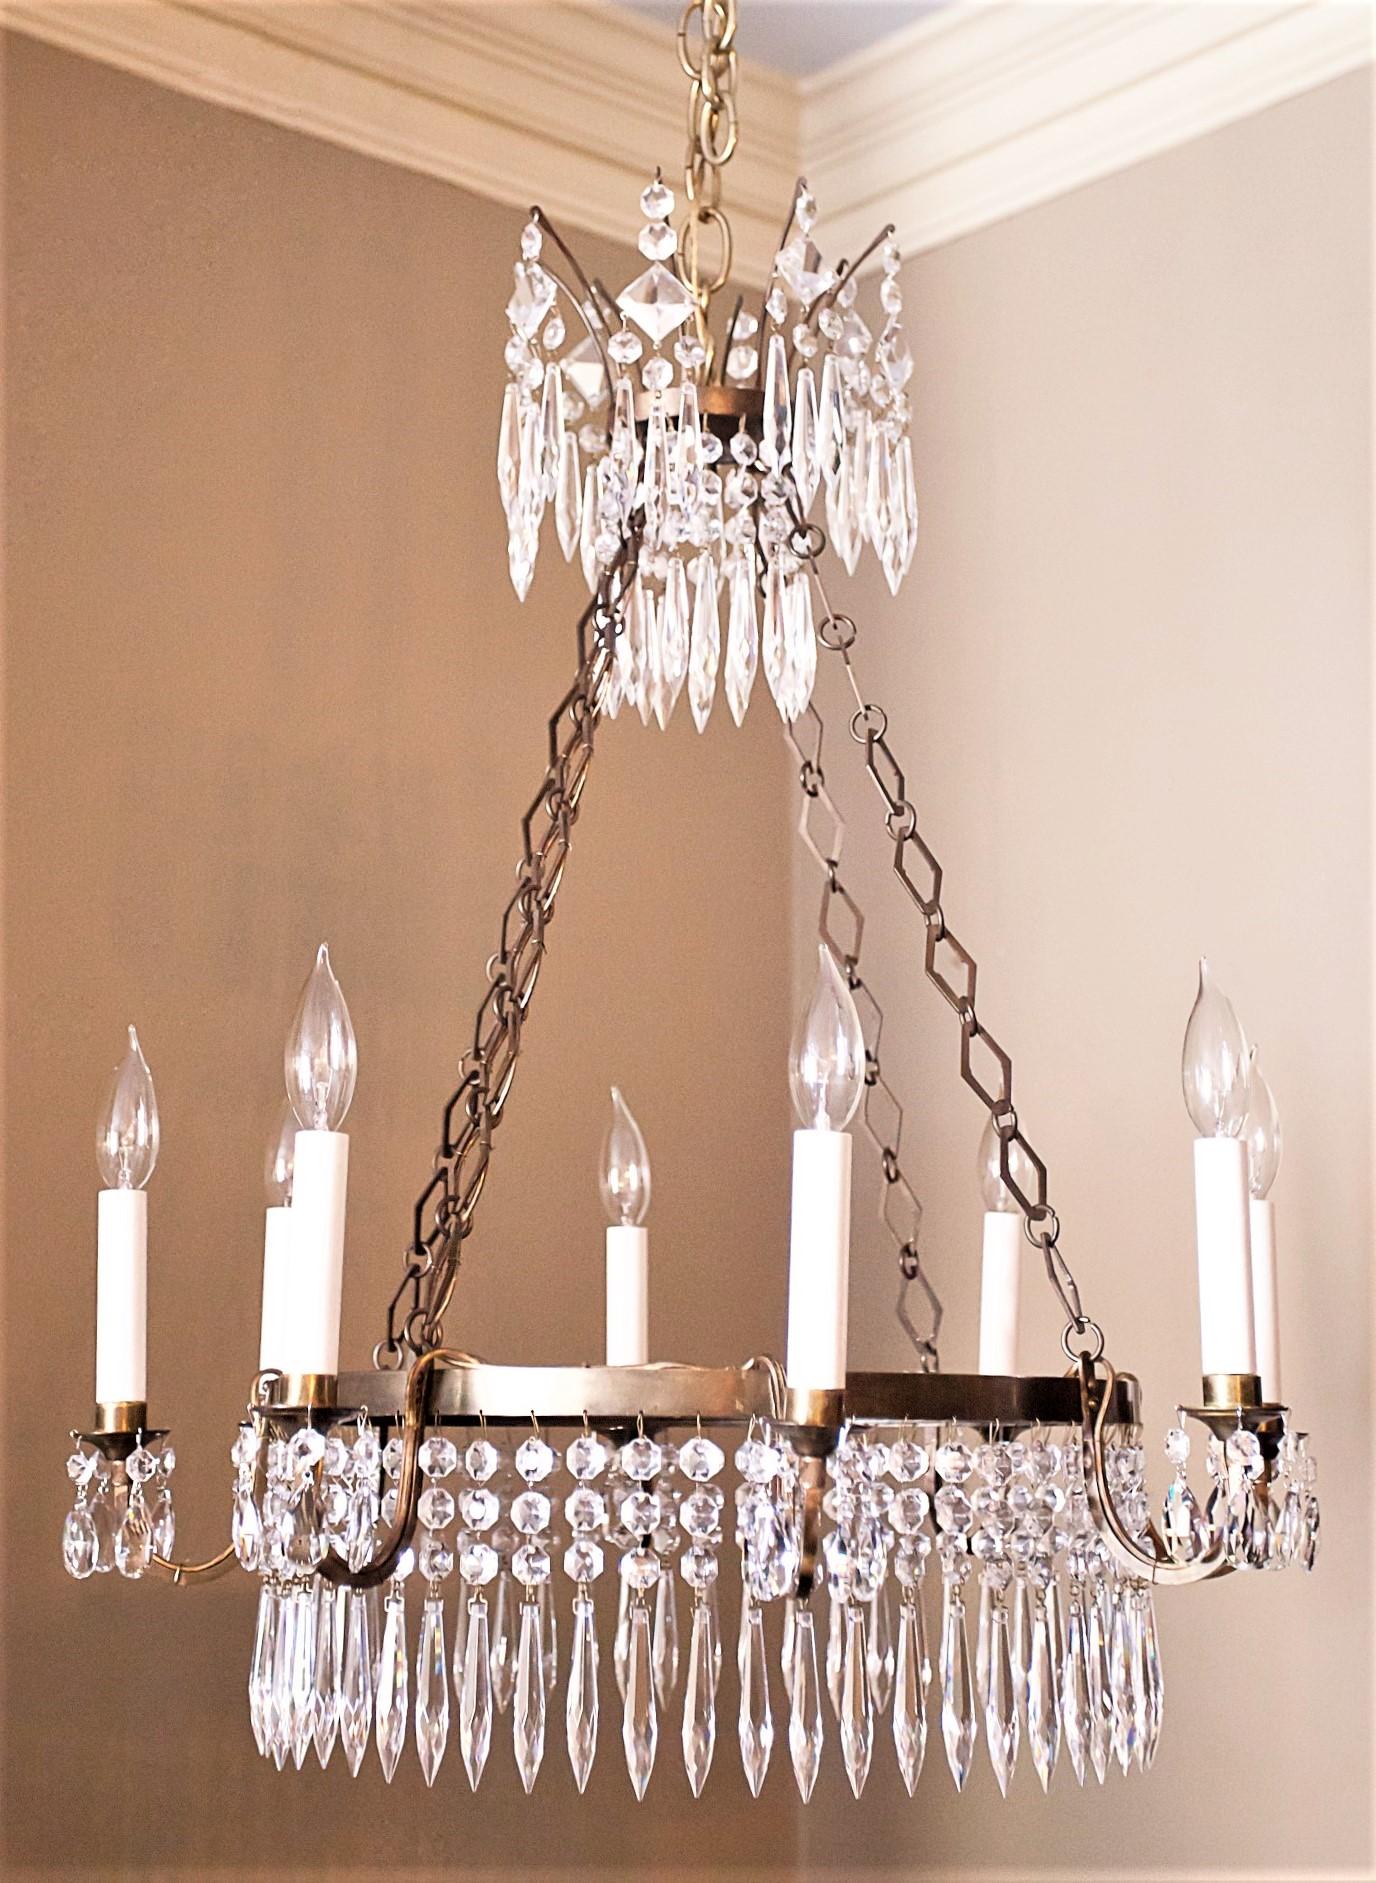 This 8-arm fixture has an original mirror plate bottom which give the fixture a distinctive look. Chandelier has hand-cast brass frame with handcut lead crystal prisms. May be shortened if desired. Ceiling cap, hanging hardware and one foot of chain